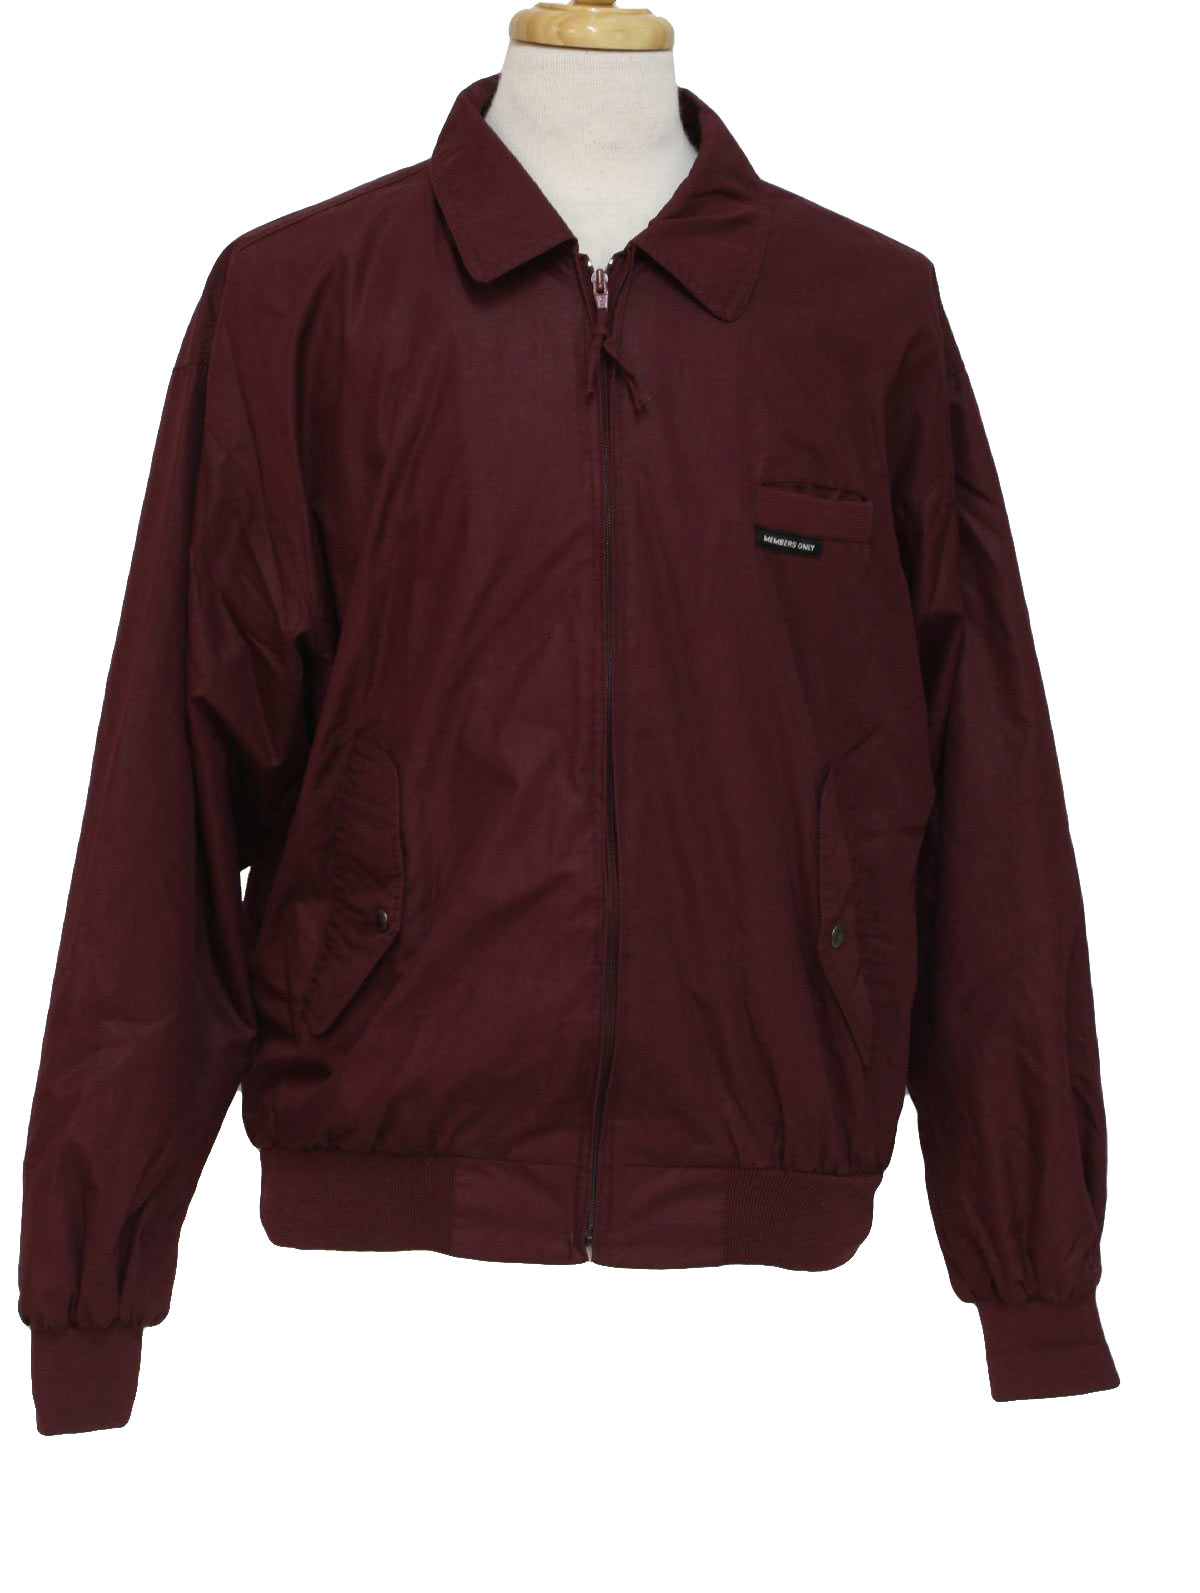 1980's Jacket (Members Only): 80s style -Members Only- Mens maroon red ...